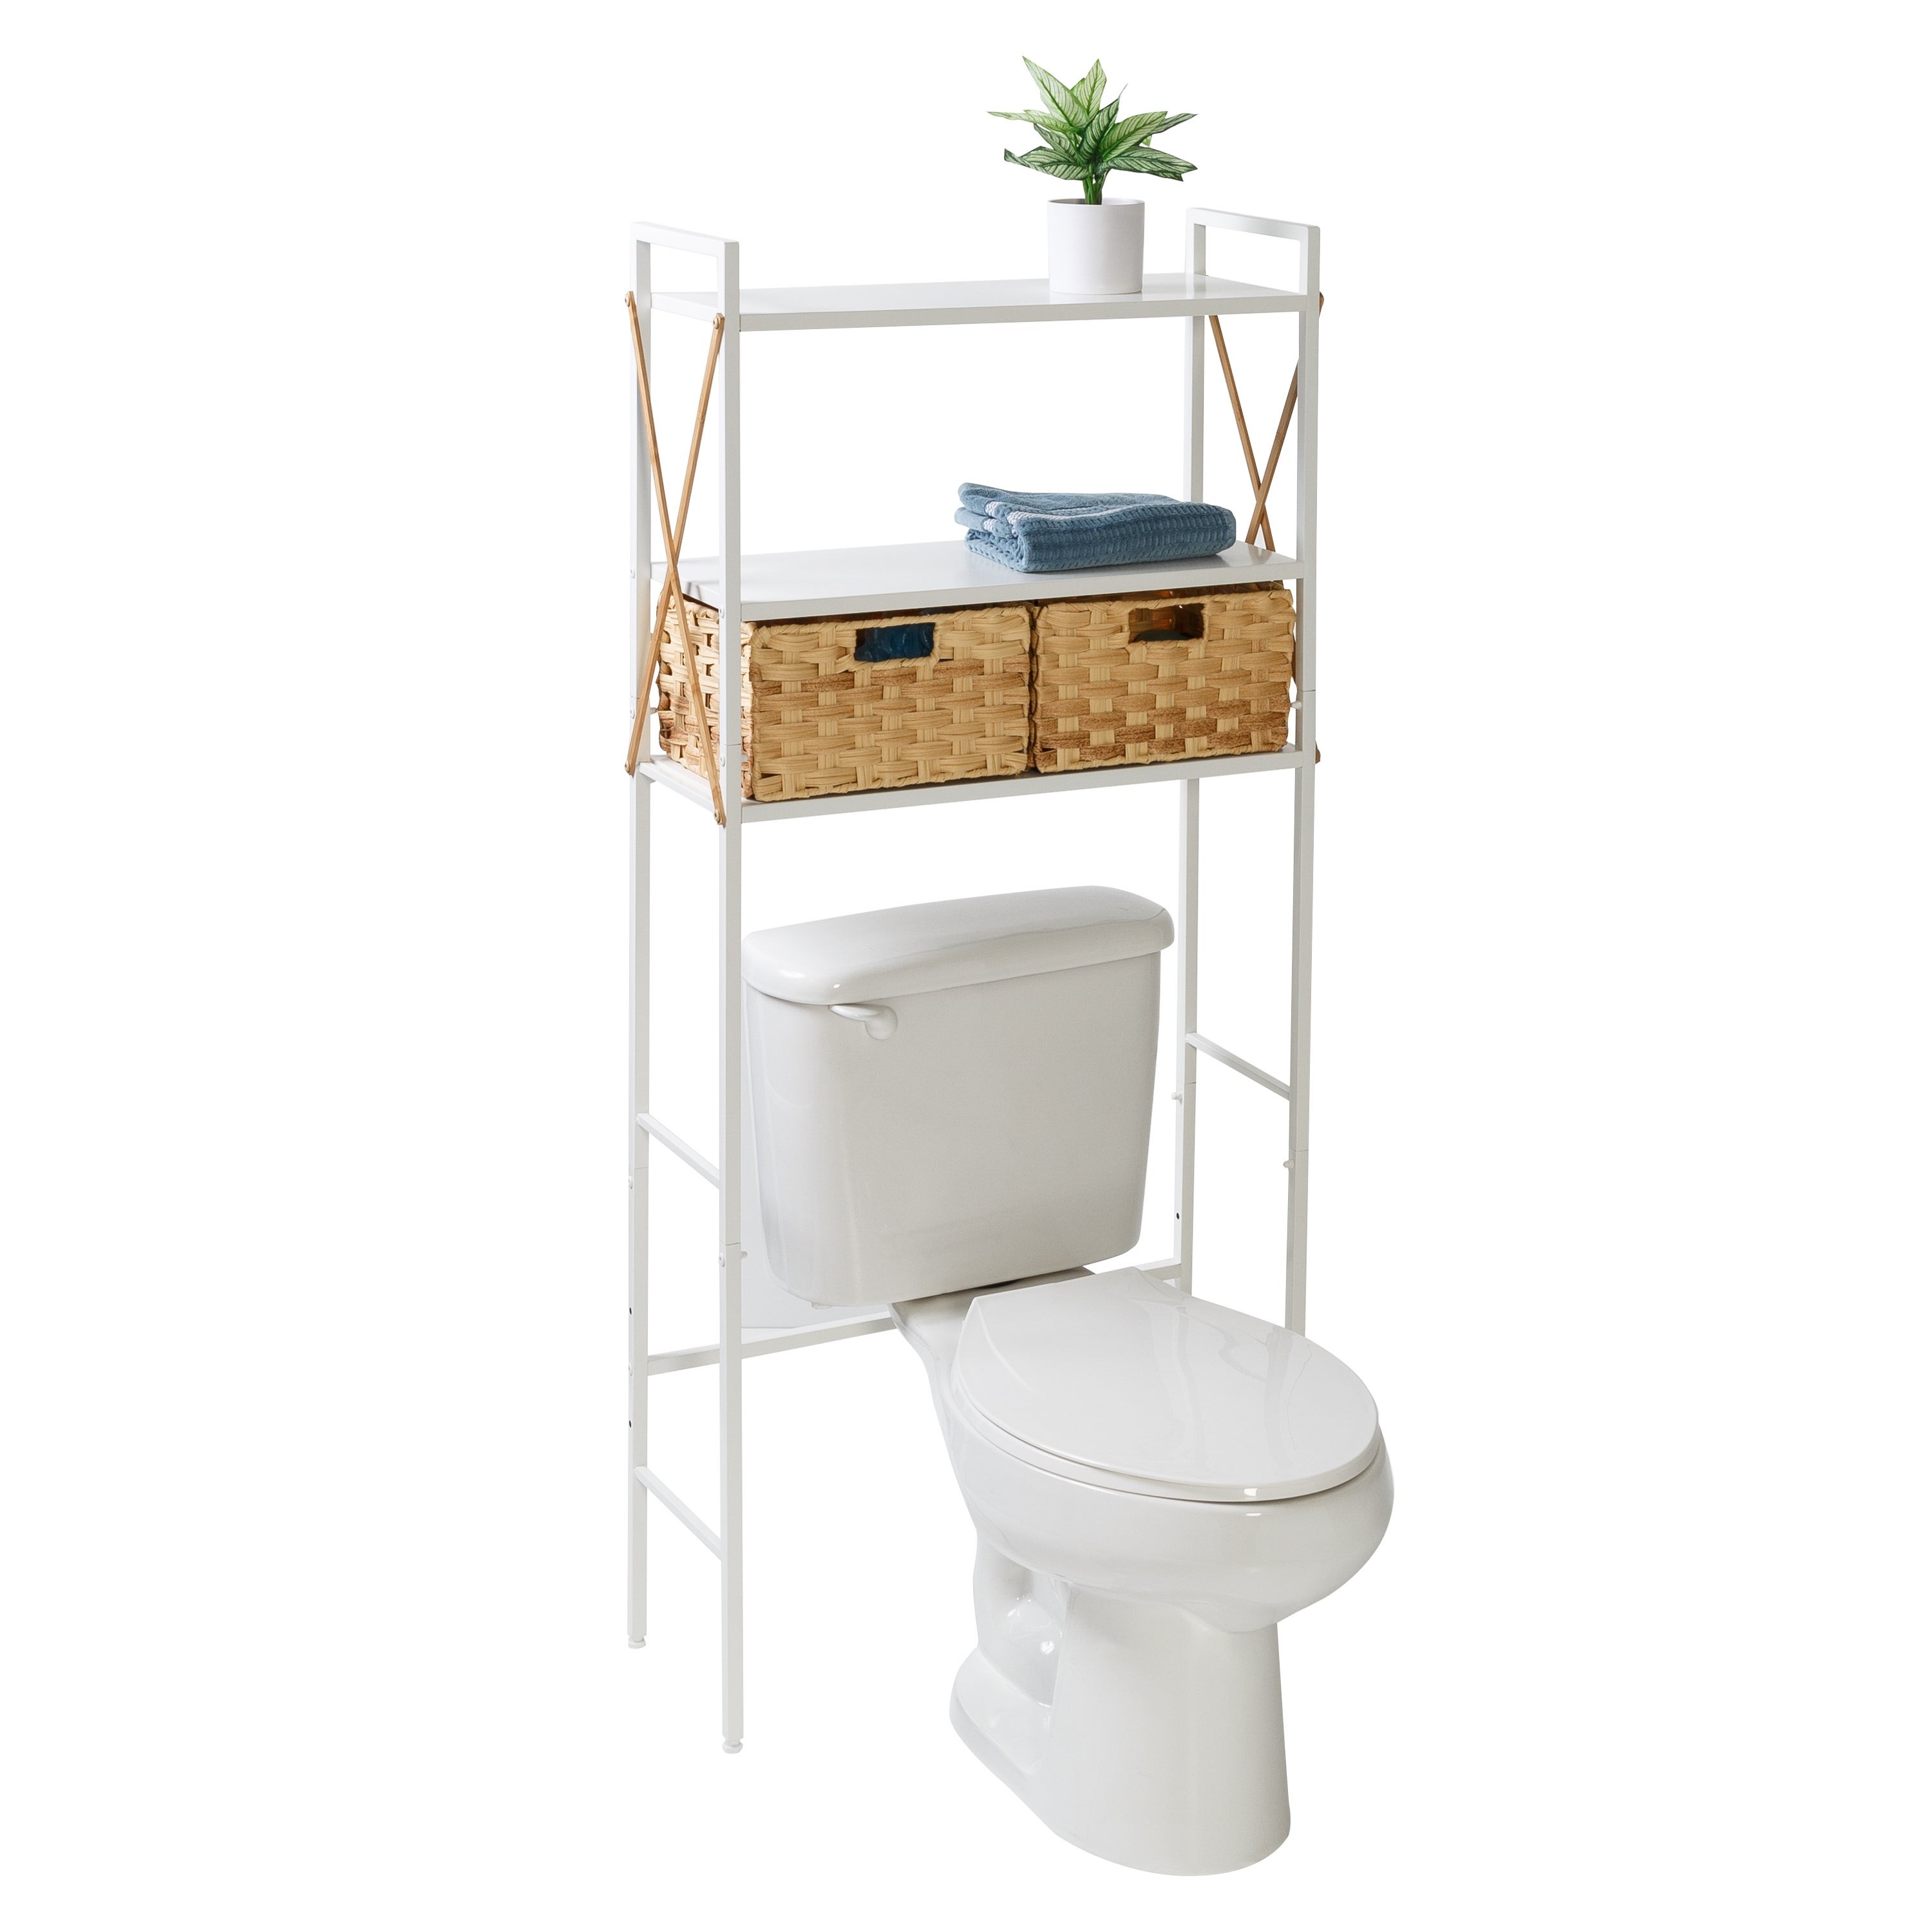 Over-the-Toilet Space Saver Shelf System w/ 2 Baskets White